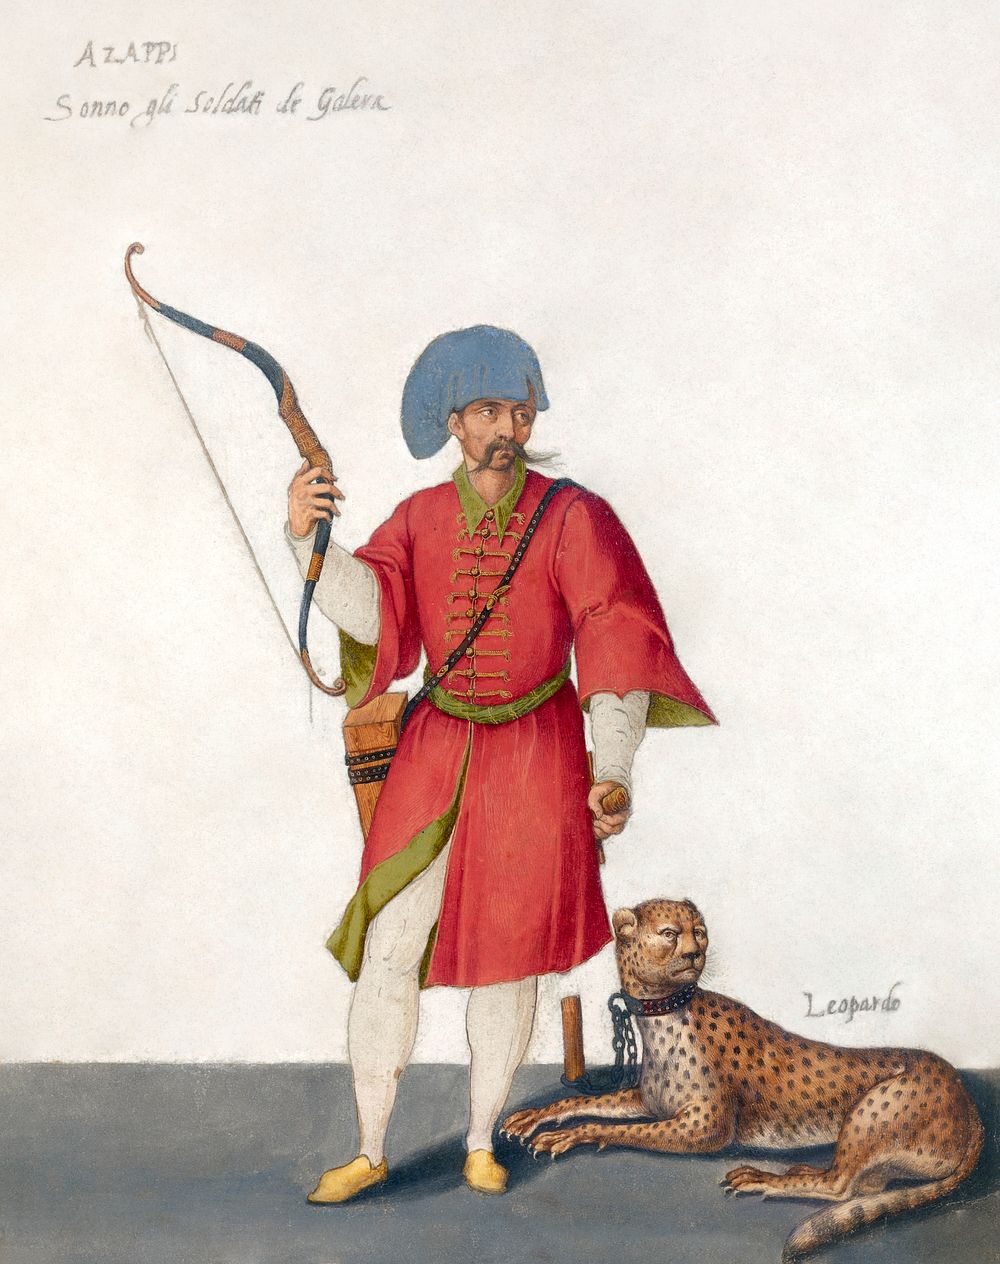 An Azappo Archer with a Cheetah (1575) painting in high resolution by Jacopo Ligozzi. Original from Getty Museum. Digitally…